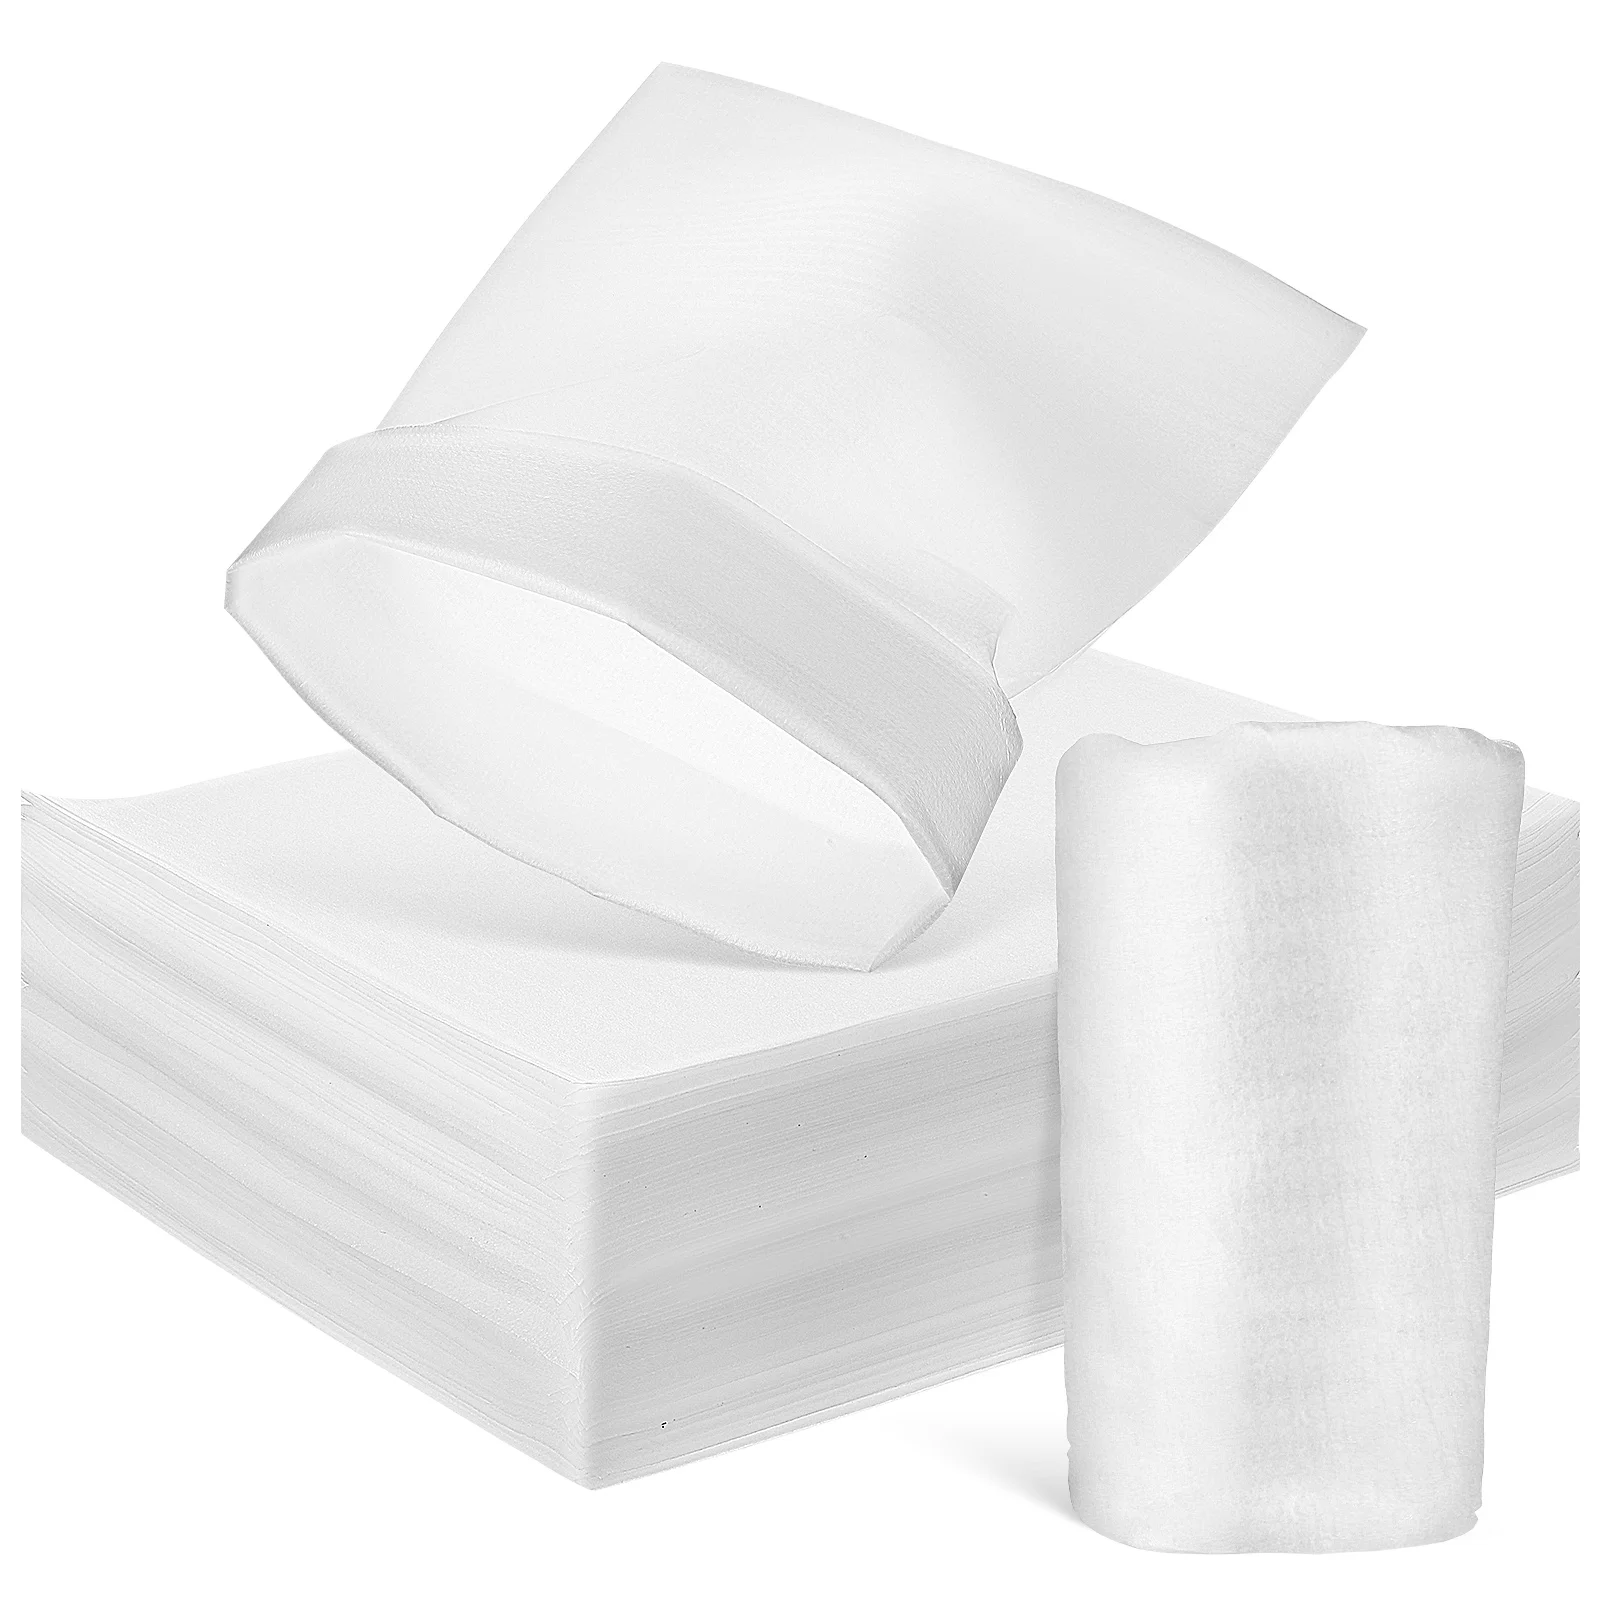 

100 Pcs Buffer Foam Bag Pe Pearl Cotton 30*40cm (100 Pieces) White Wrapping Paper Pouches Cushion or Packing Bags